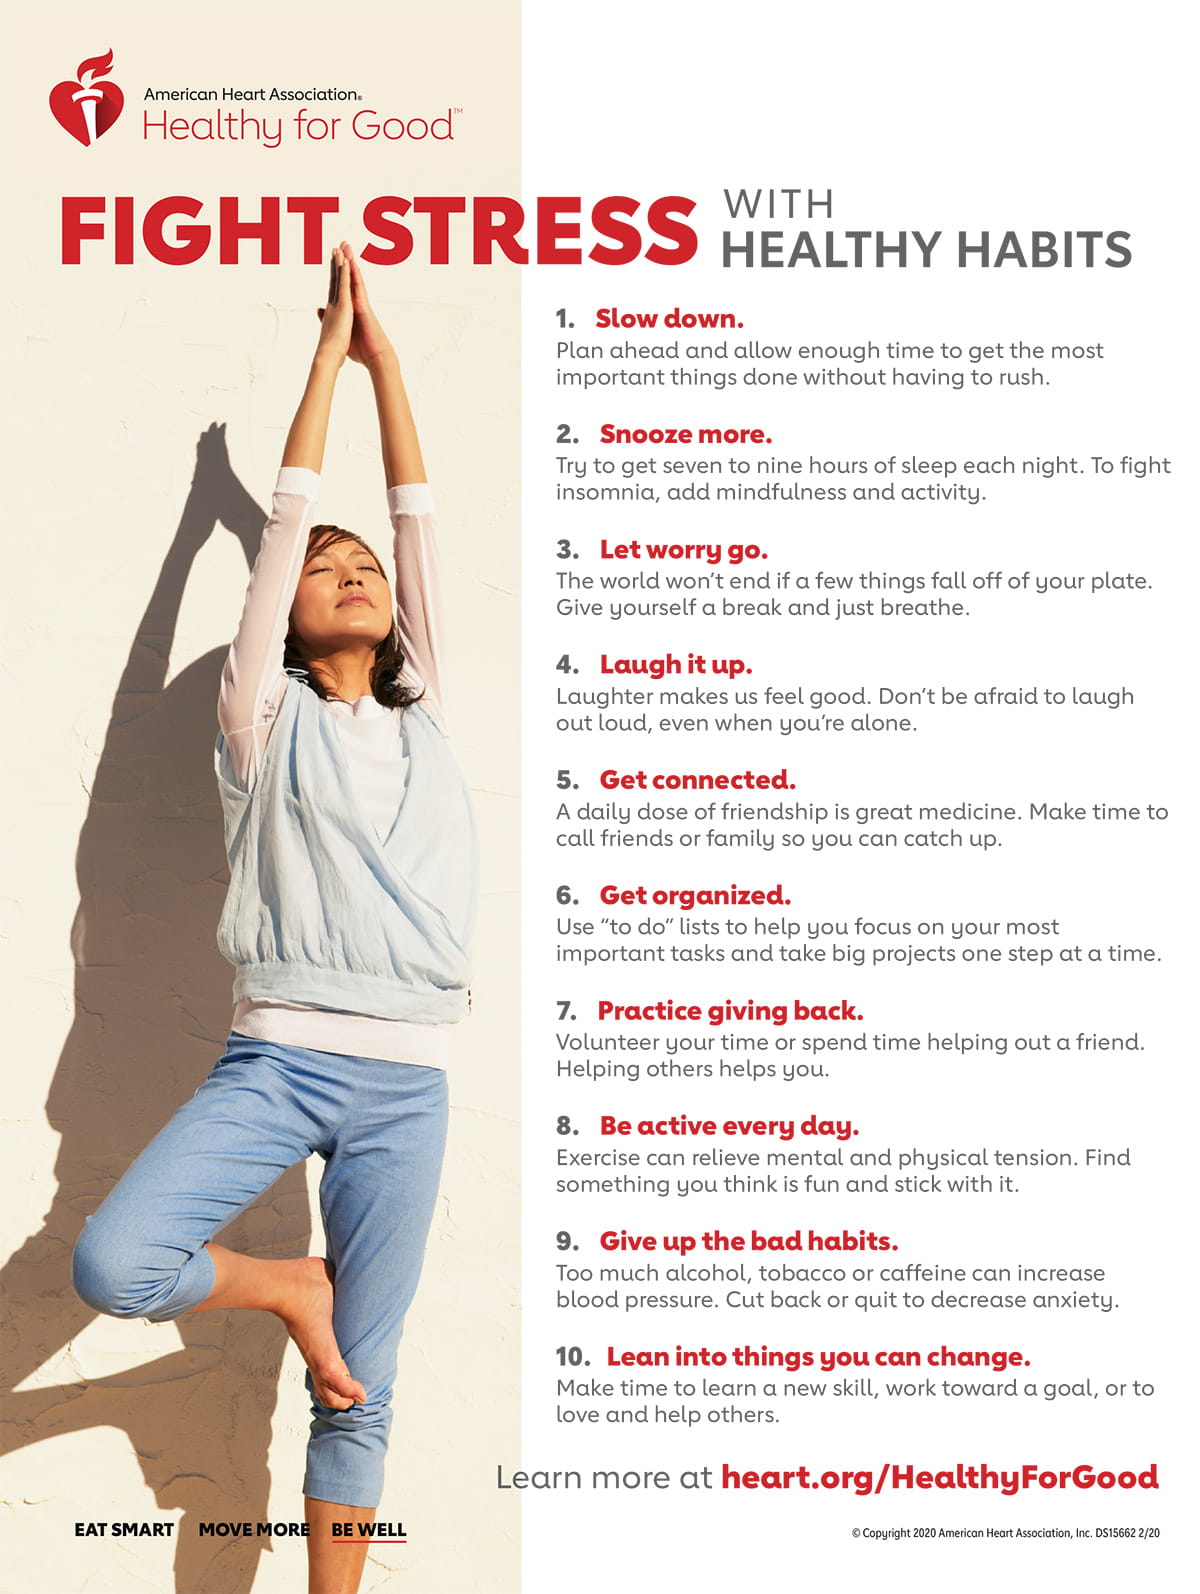 How does stress impact a healthy lifestyle?